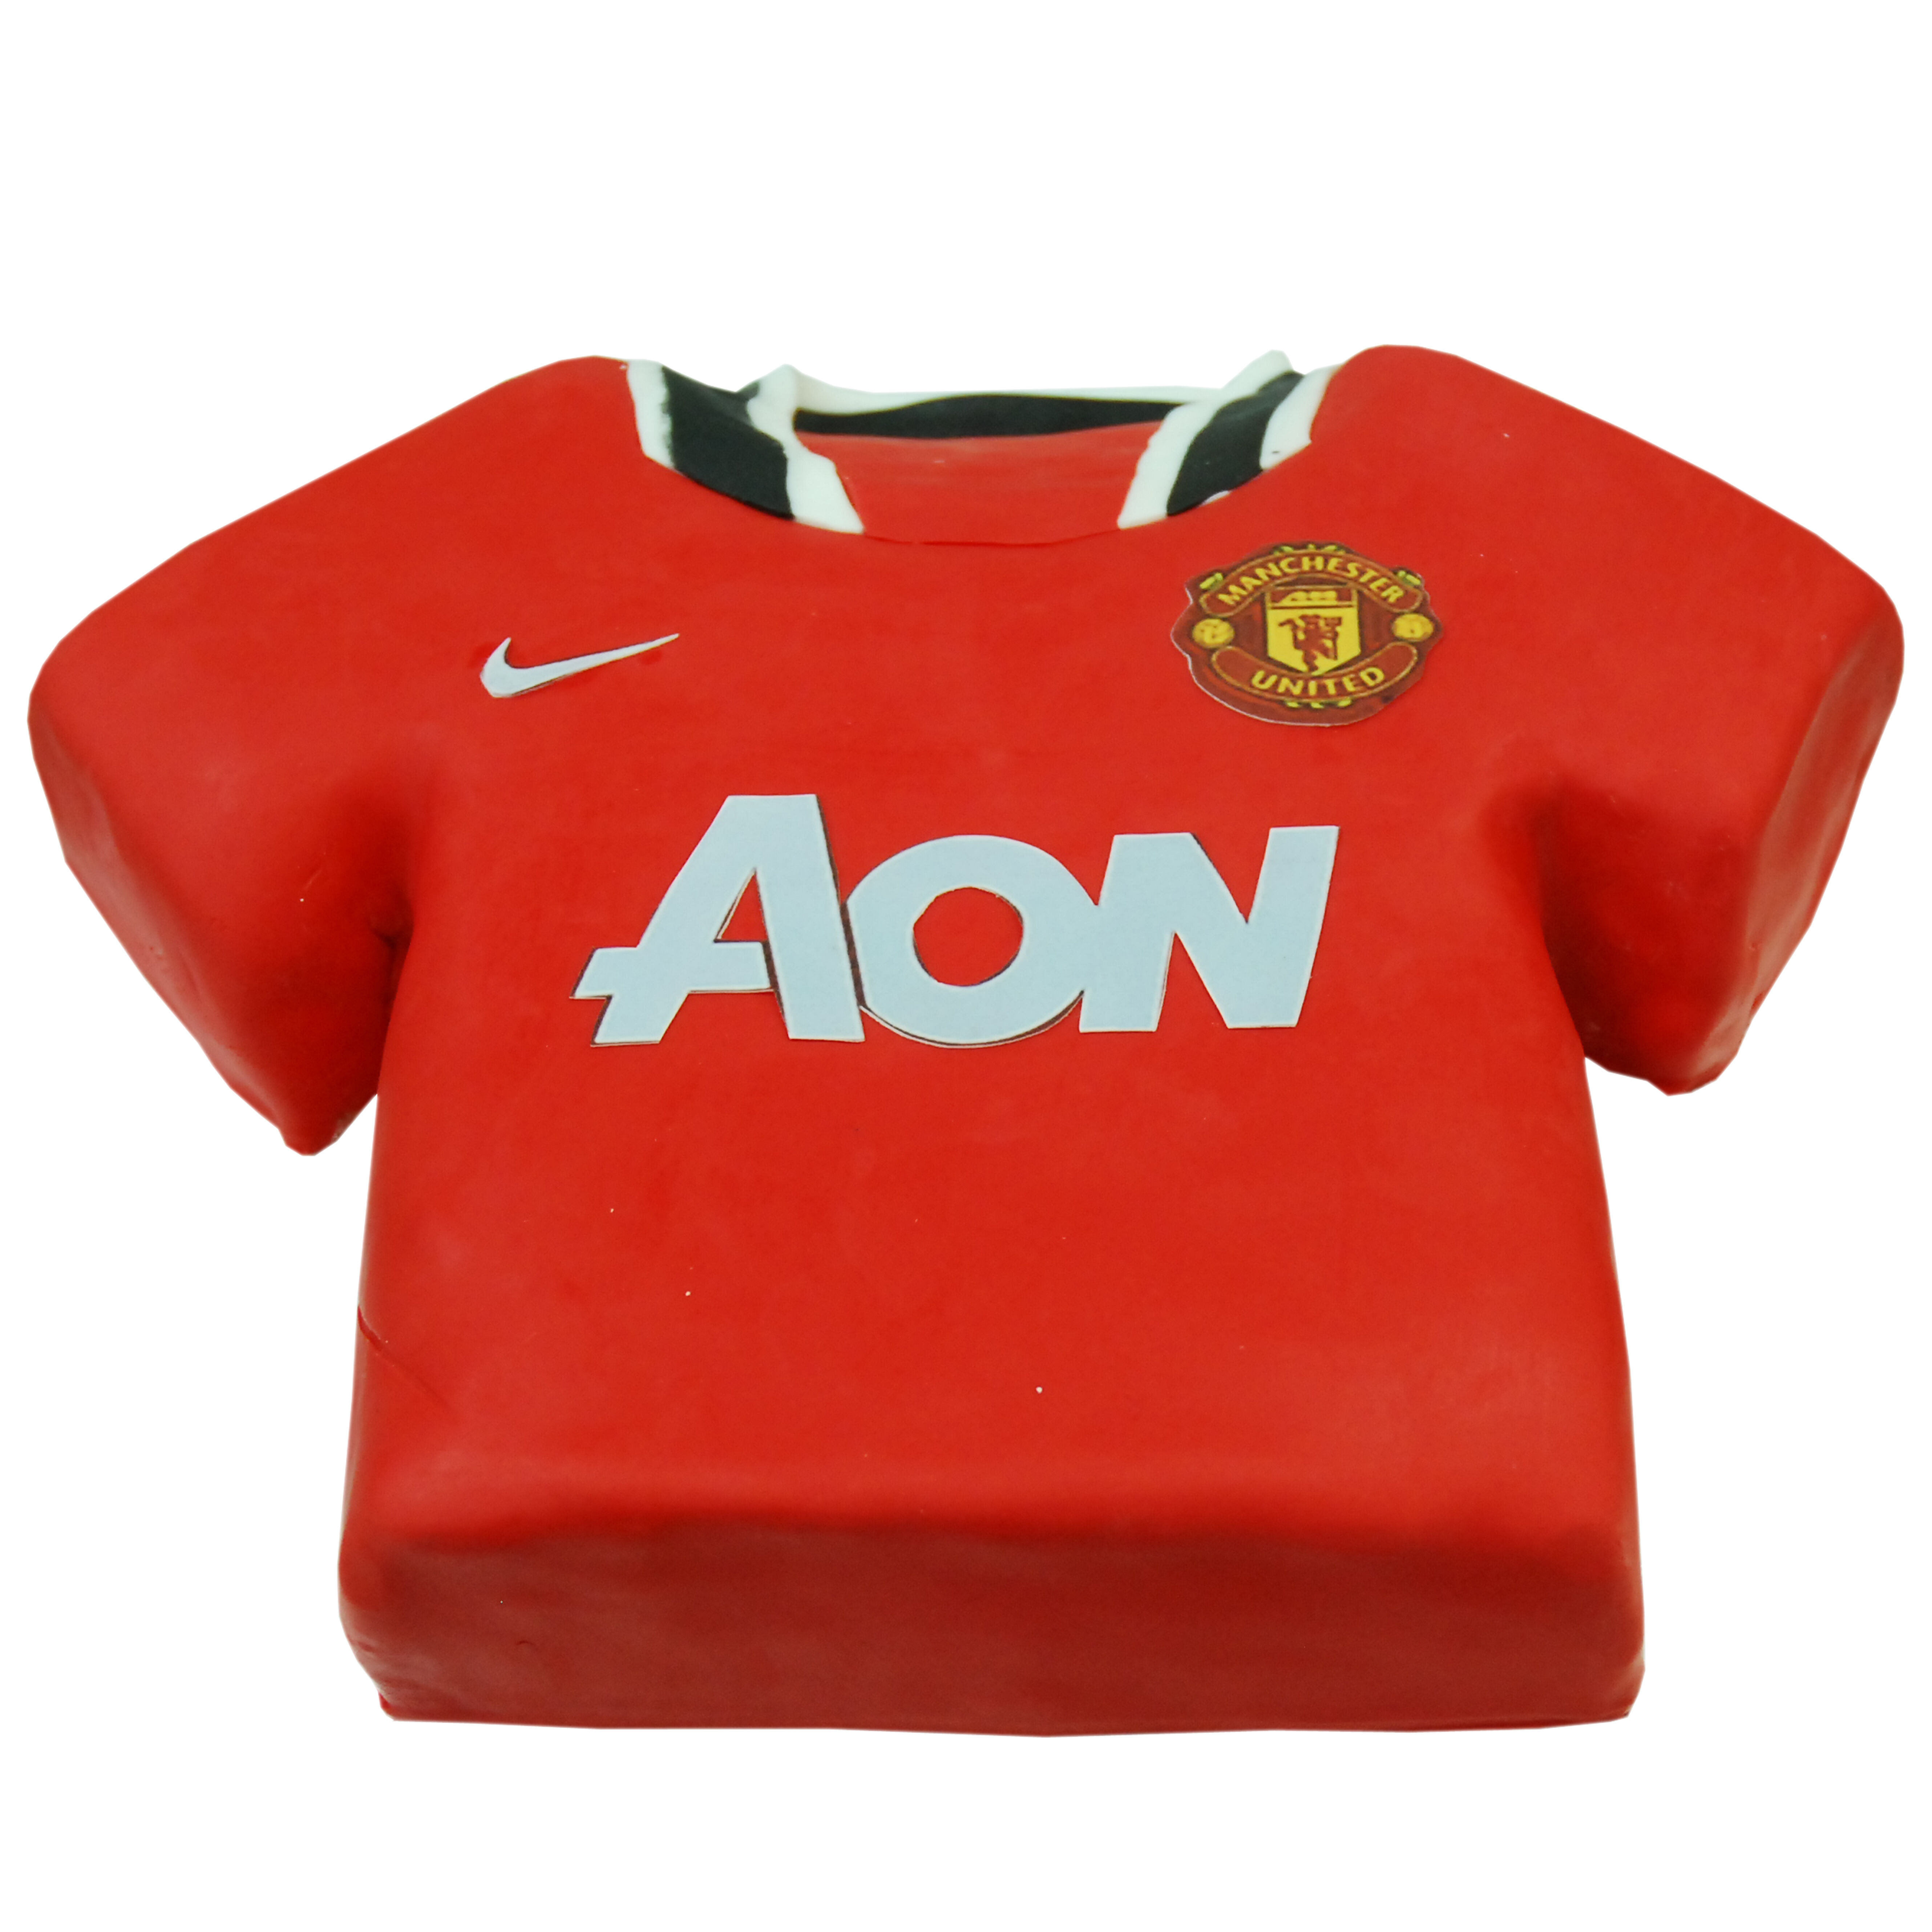 Cakes & Cupcakes By Sam!: Manchester United Shirt for Sean!